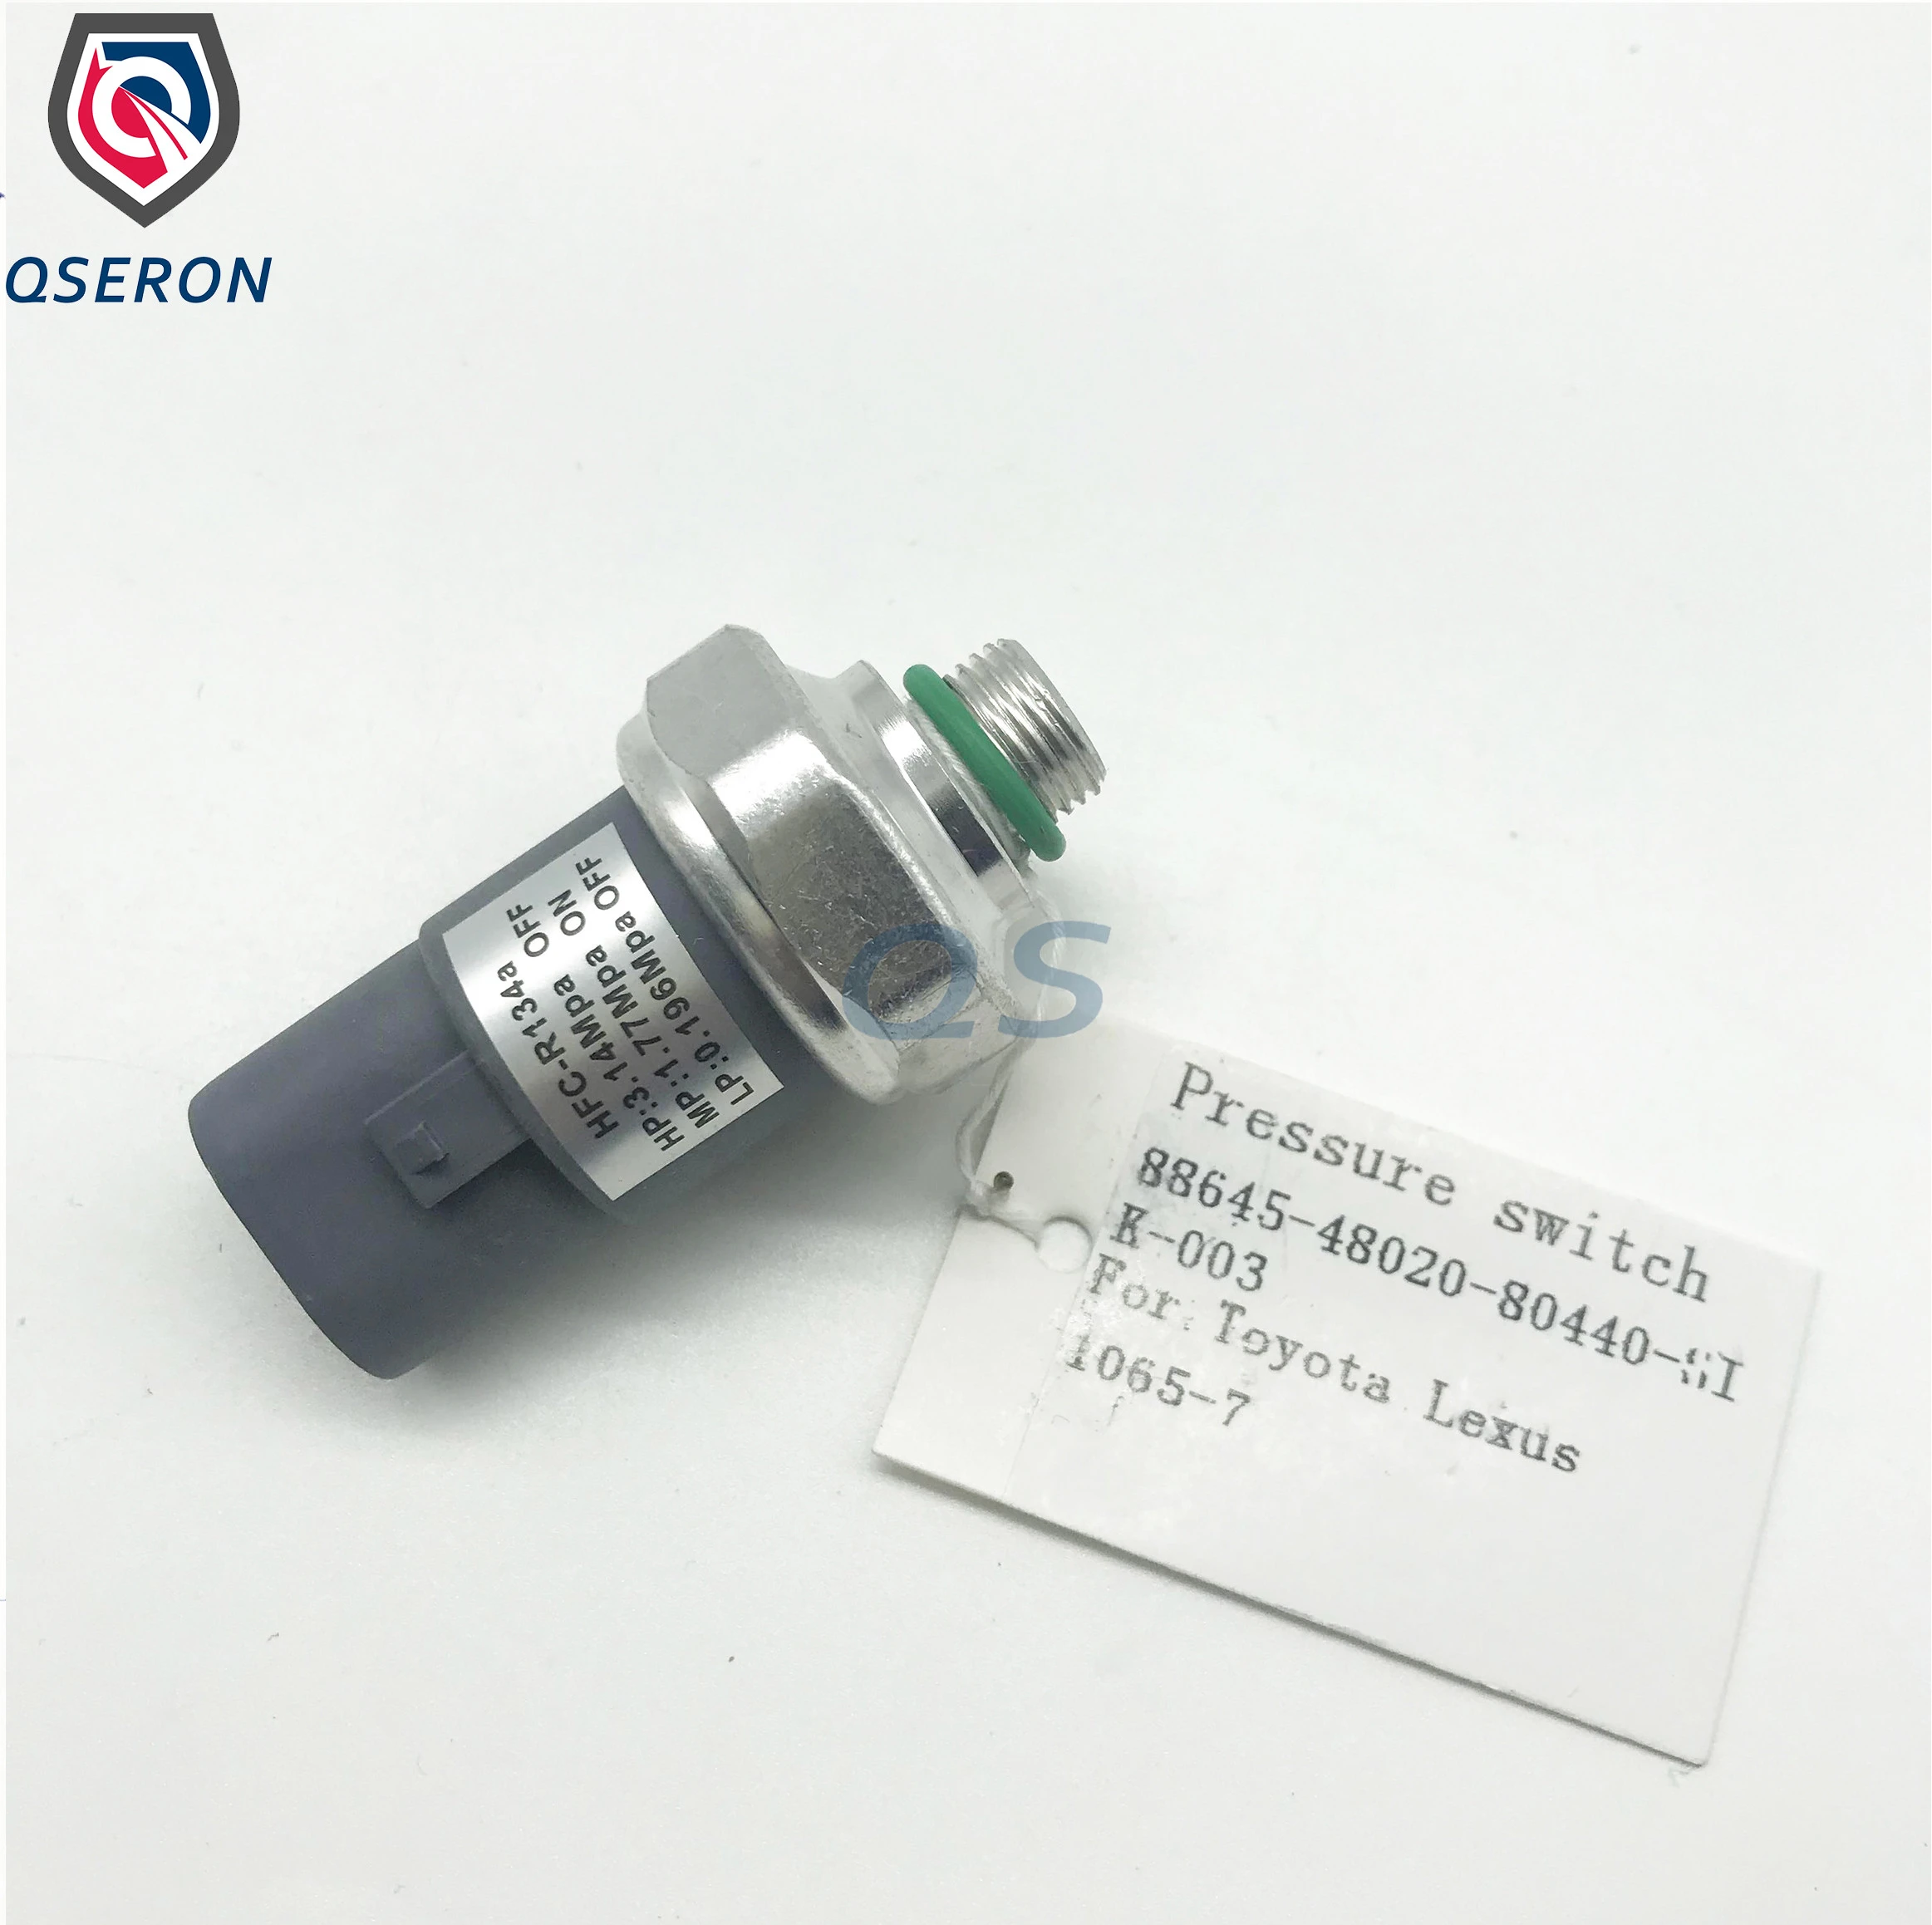 Car Air Conditioning Pressure Switch 88645-48020-80440-SI ACPSW CPressSwitch K-003 ACSW A/C-Press-Switch 1065-7 For Toyota Lexus